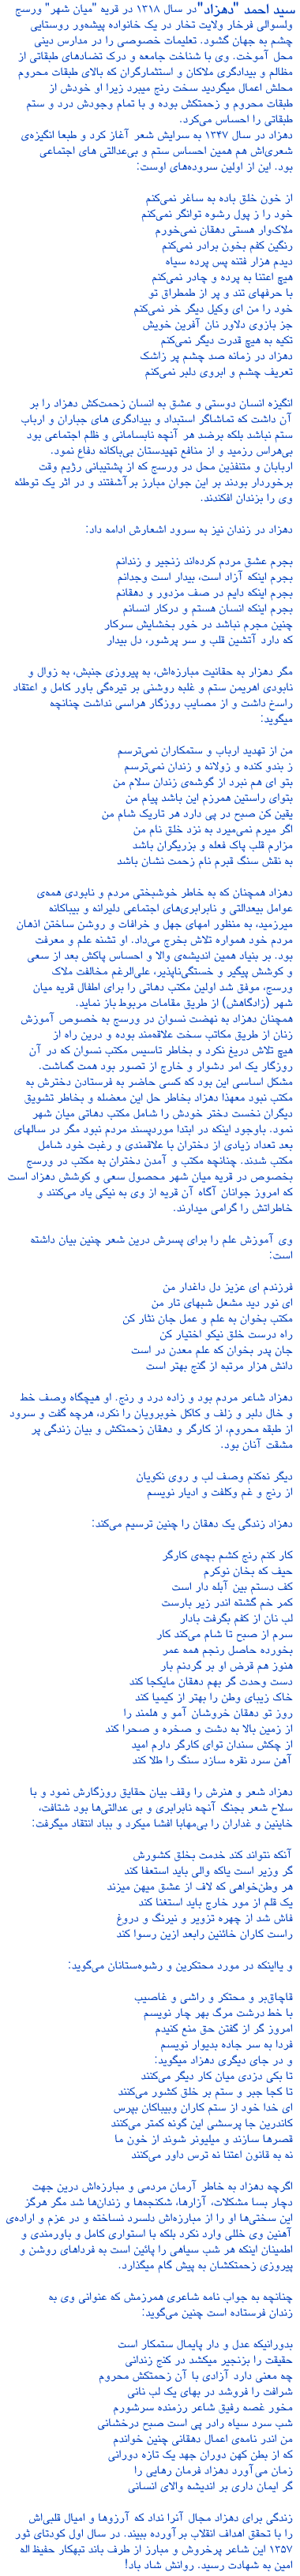 About Sayed Ahmad Dehzad and his poems